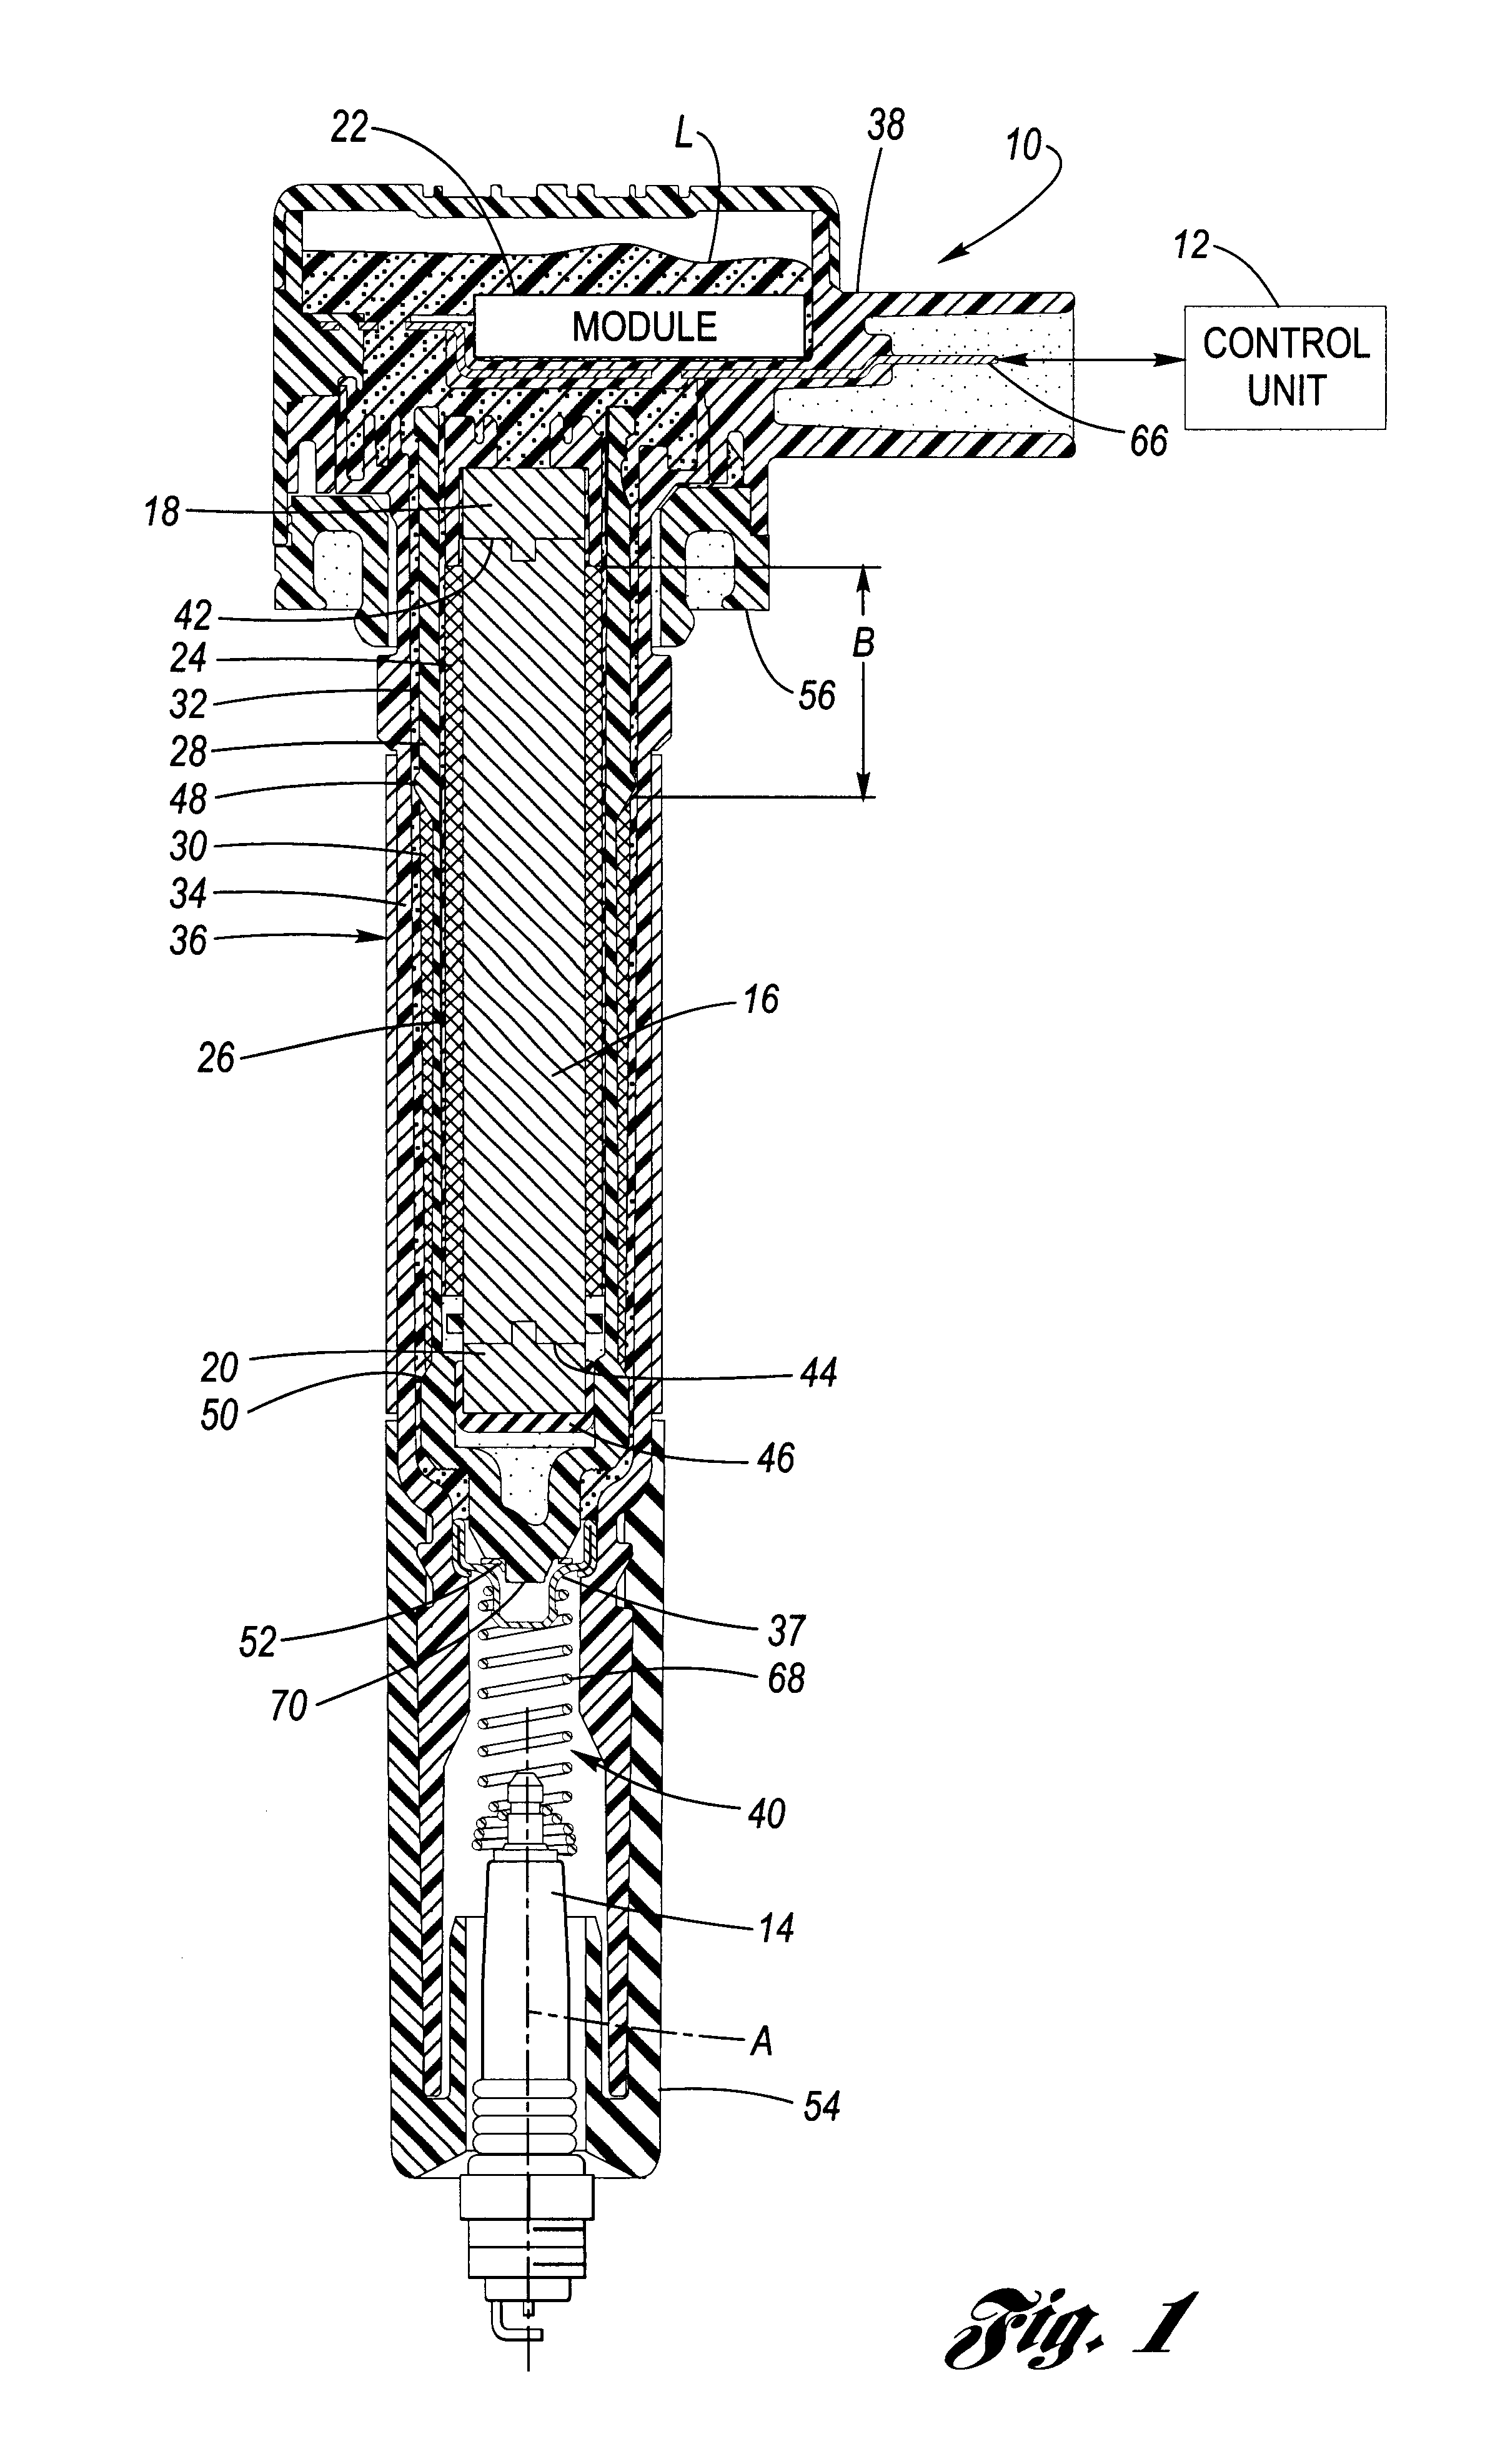 Ignition apparatus having increased leakage to charge ion sense system